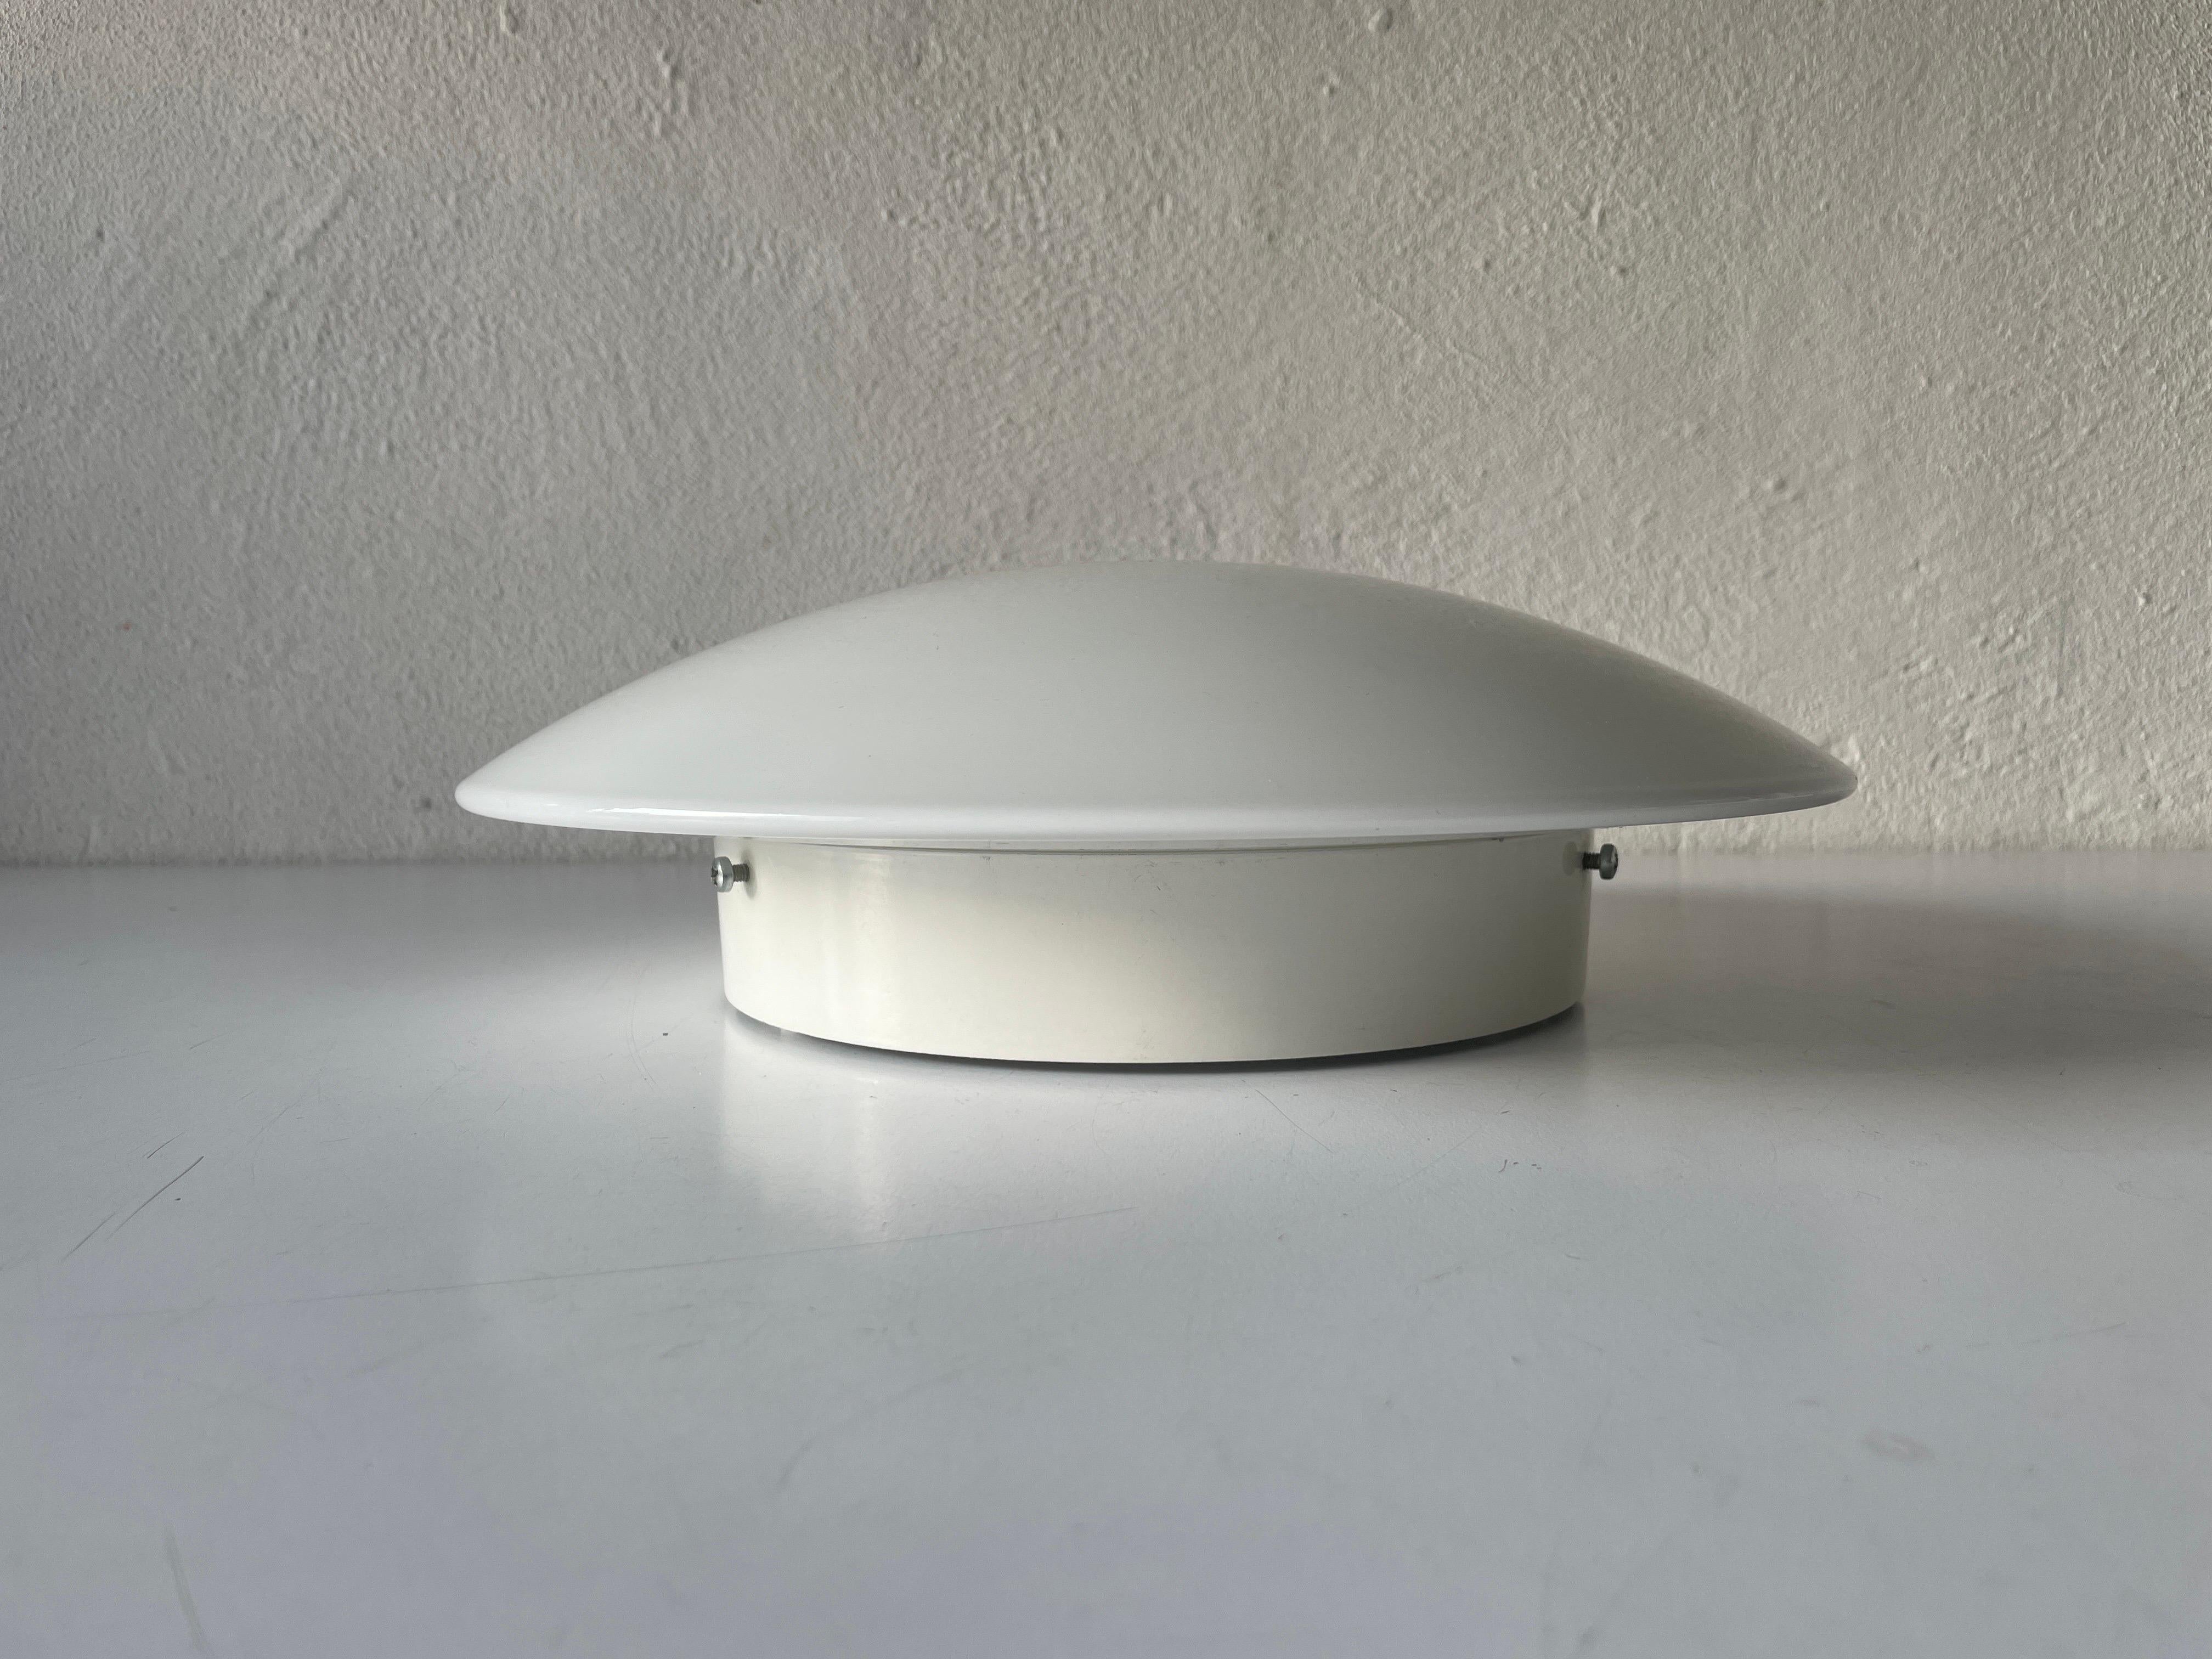 Mushroom white glass flush mount or wall lamp by Peill Putzler, 1960s, Germany

Sculptural very elegant rare design flush mount. 

It is very ideal and suitable for all living areas.

Lamp is in good condition. No damage, no crack.
Wear